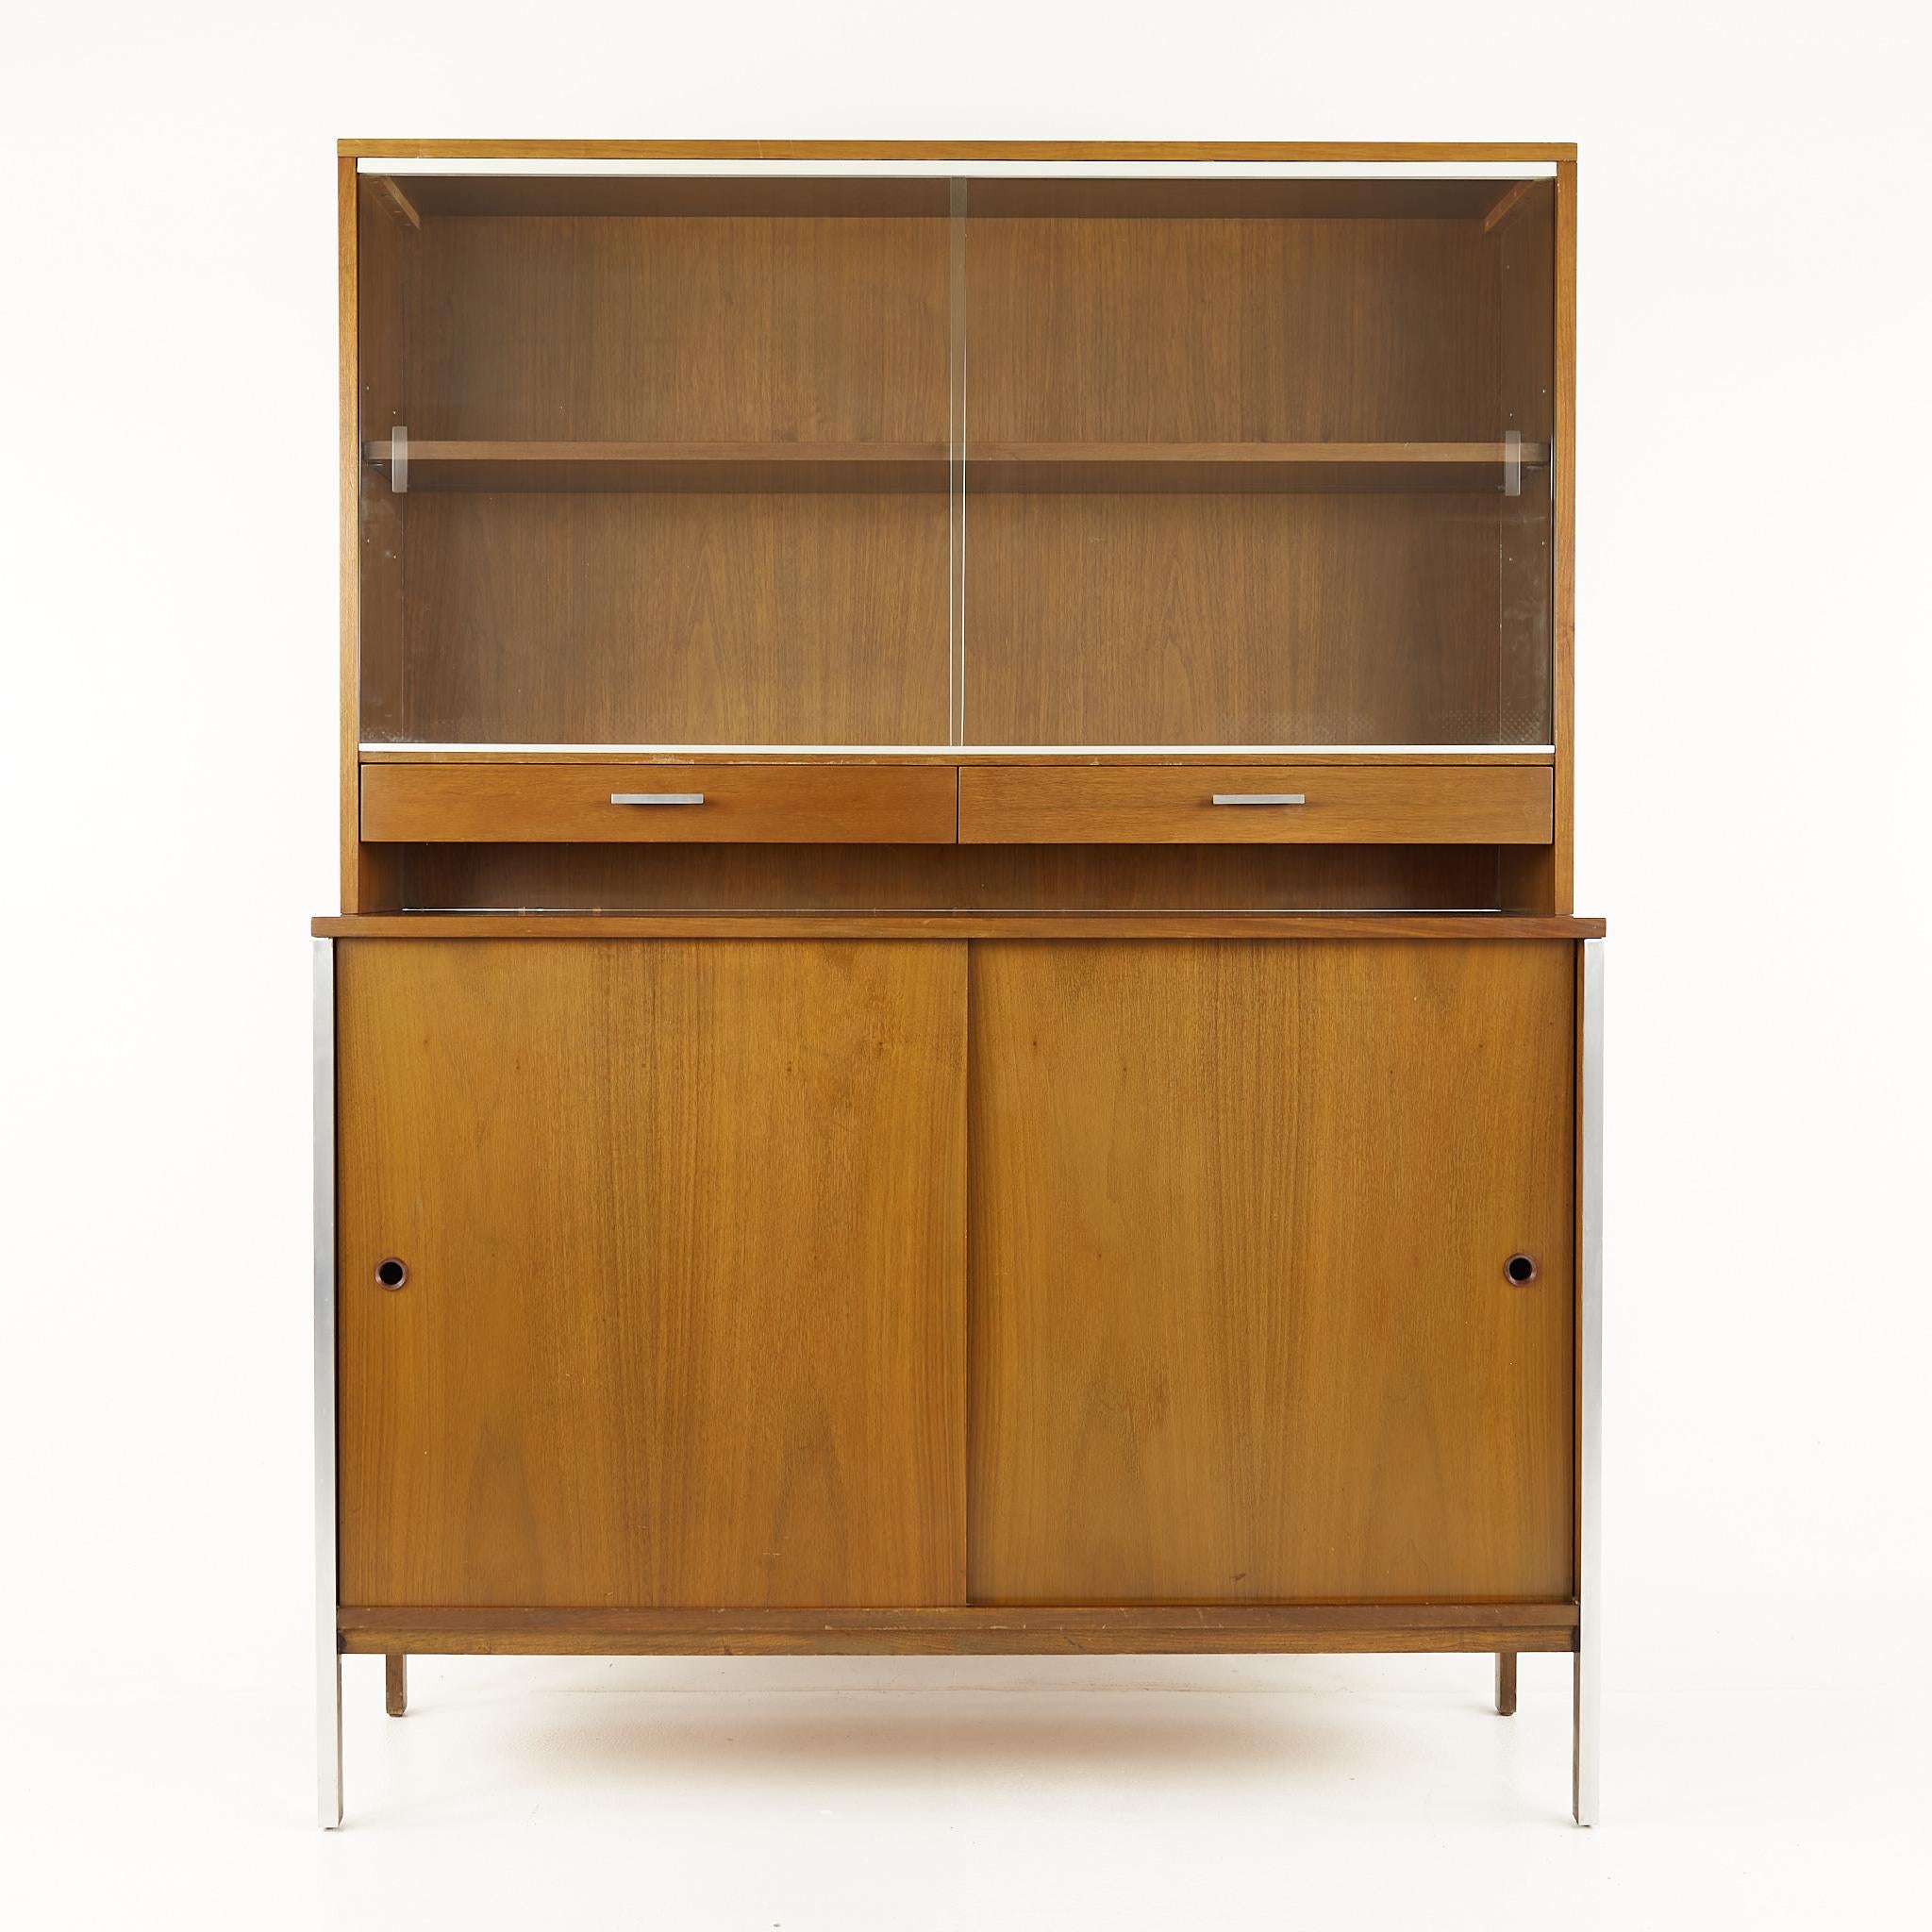 Paul McCobb for Calvin mid century sideboard Credenza buffet with hutch

This buffet with hutch measures: 48 wide x 18 deep x 64.25 inches high

This sideboard measures 48 wide x 18 deep x 34.25 inches high

All pieces of furniture can be had